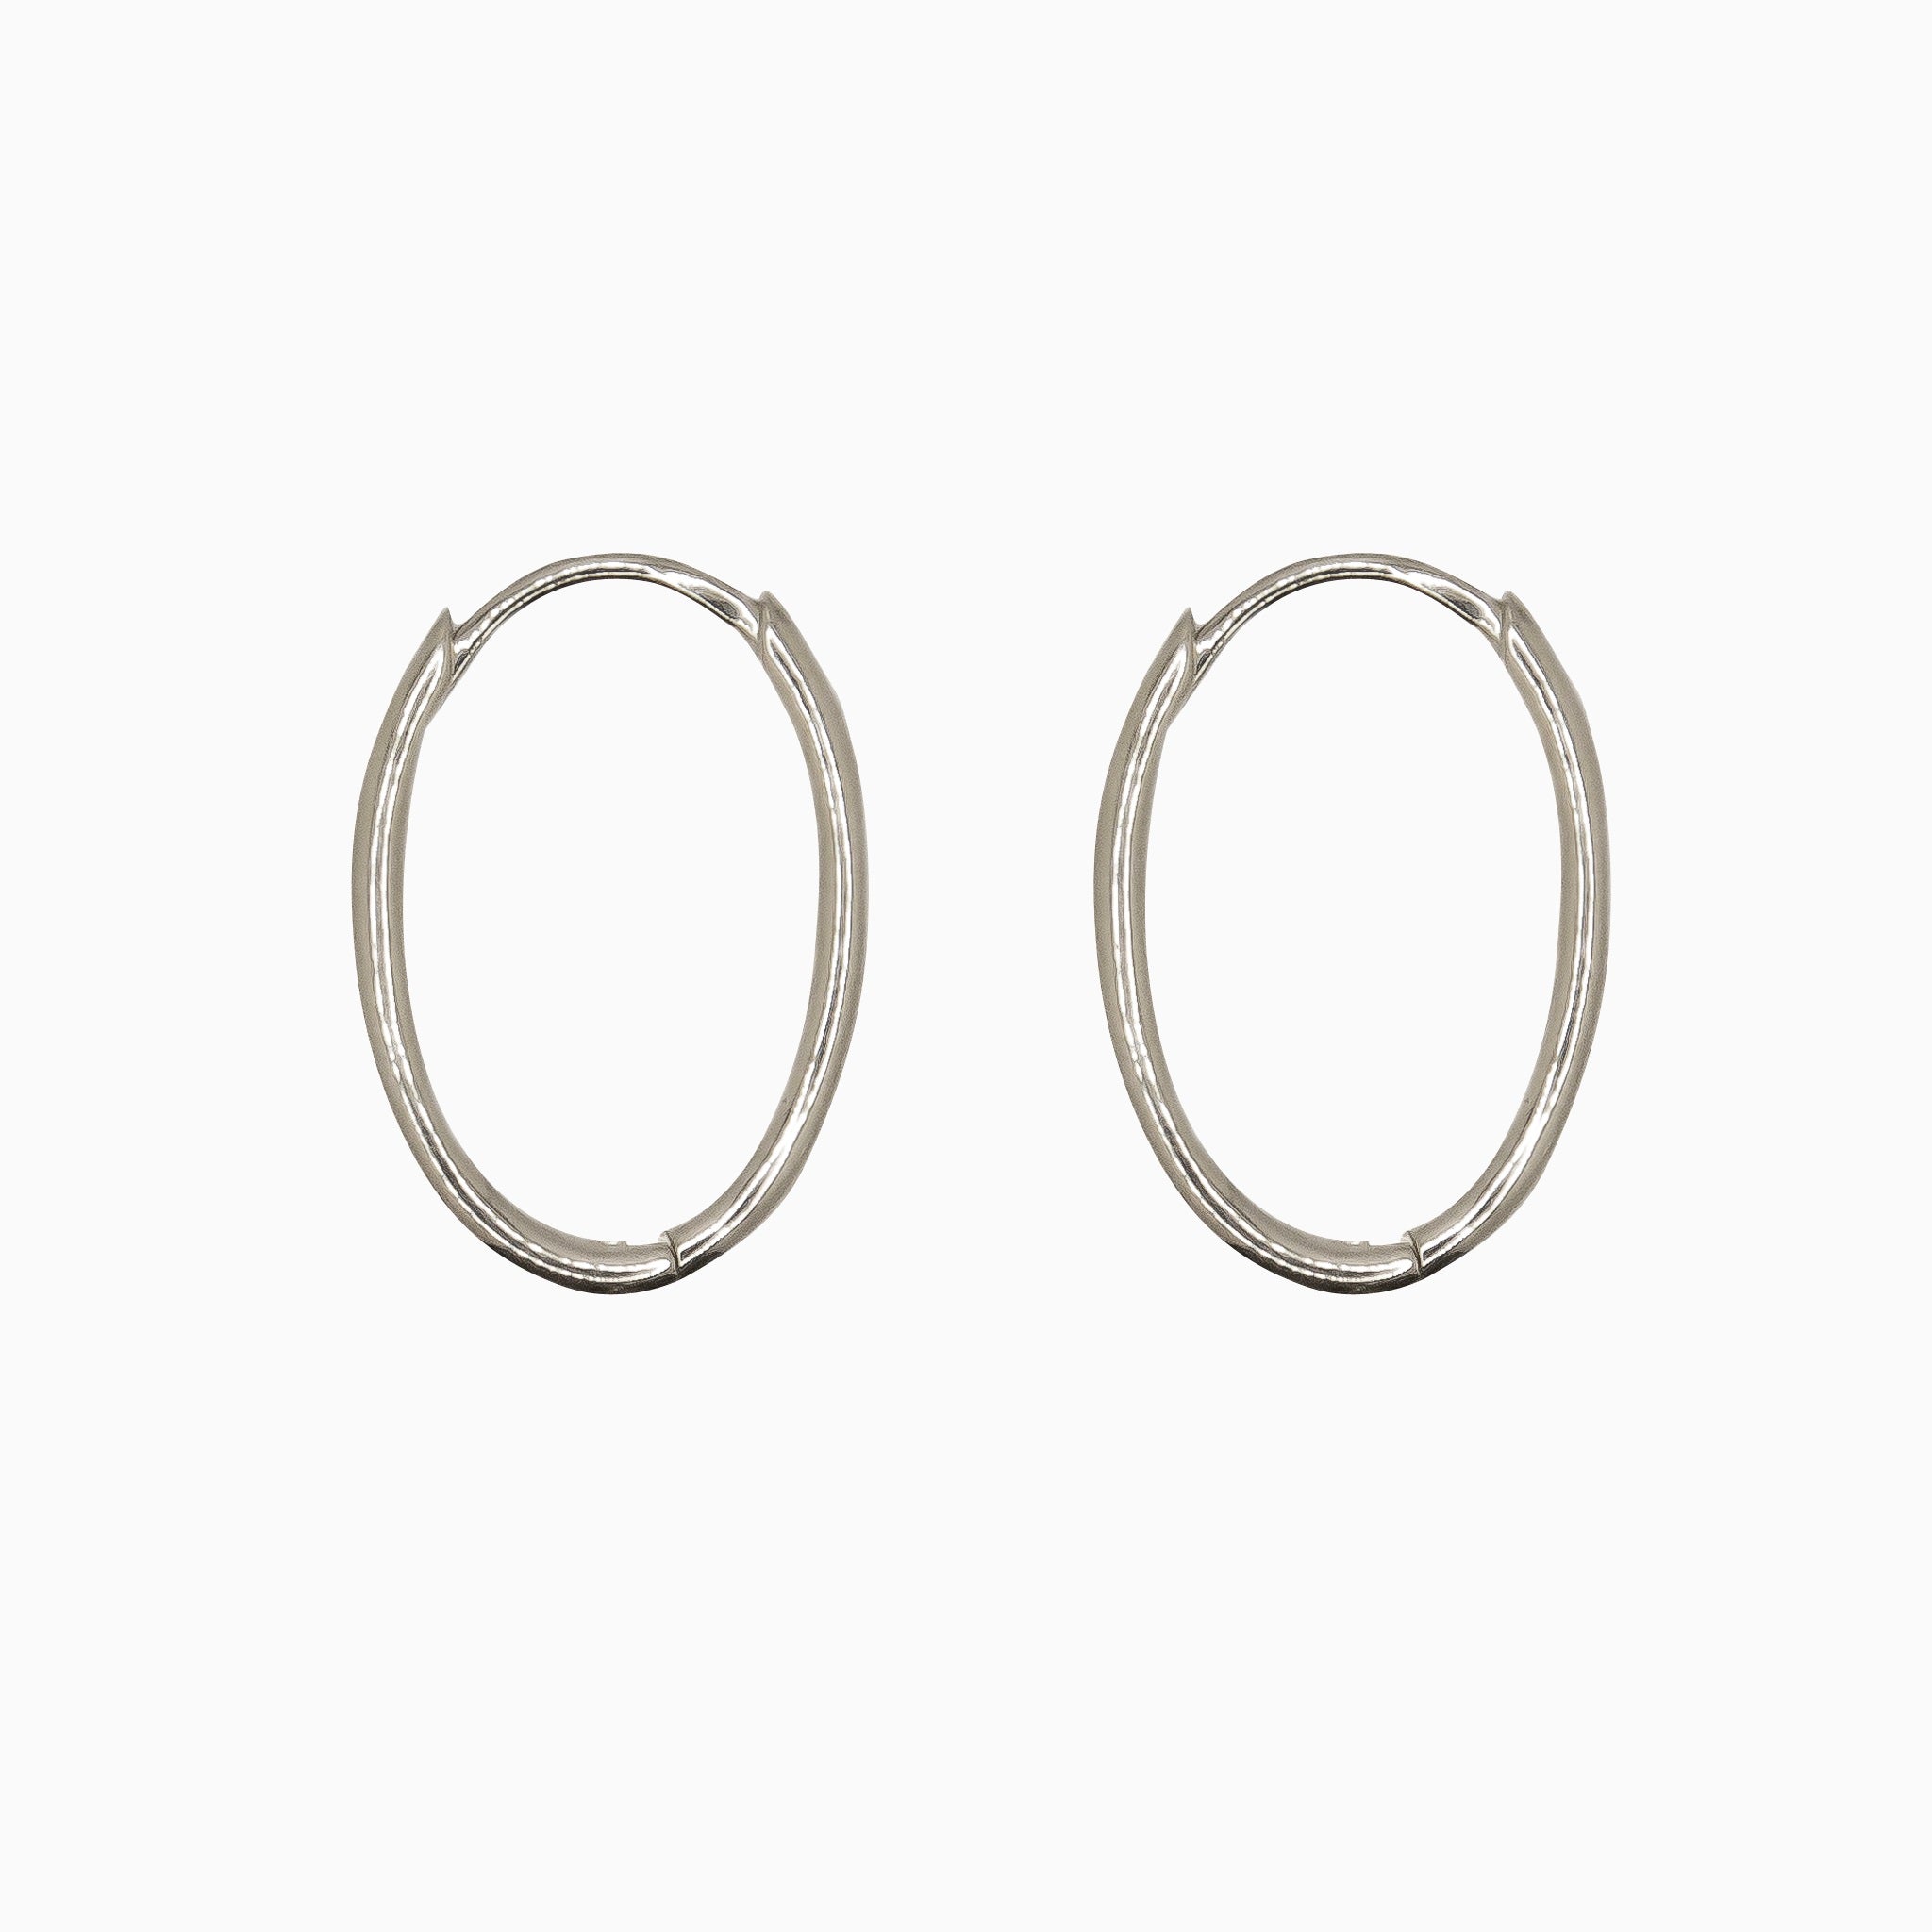 14k White Gold 13mm x 9mm Hinged Everyday Oval Solid Hoop Earrings, Side View